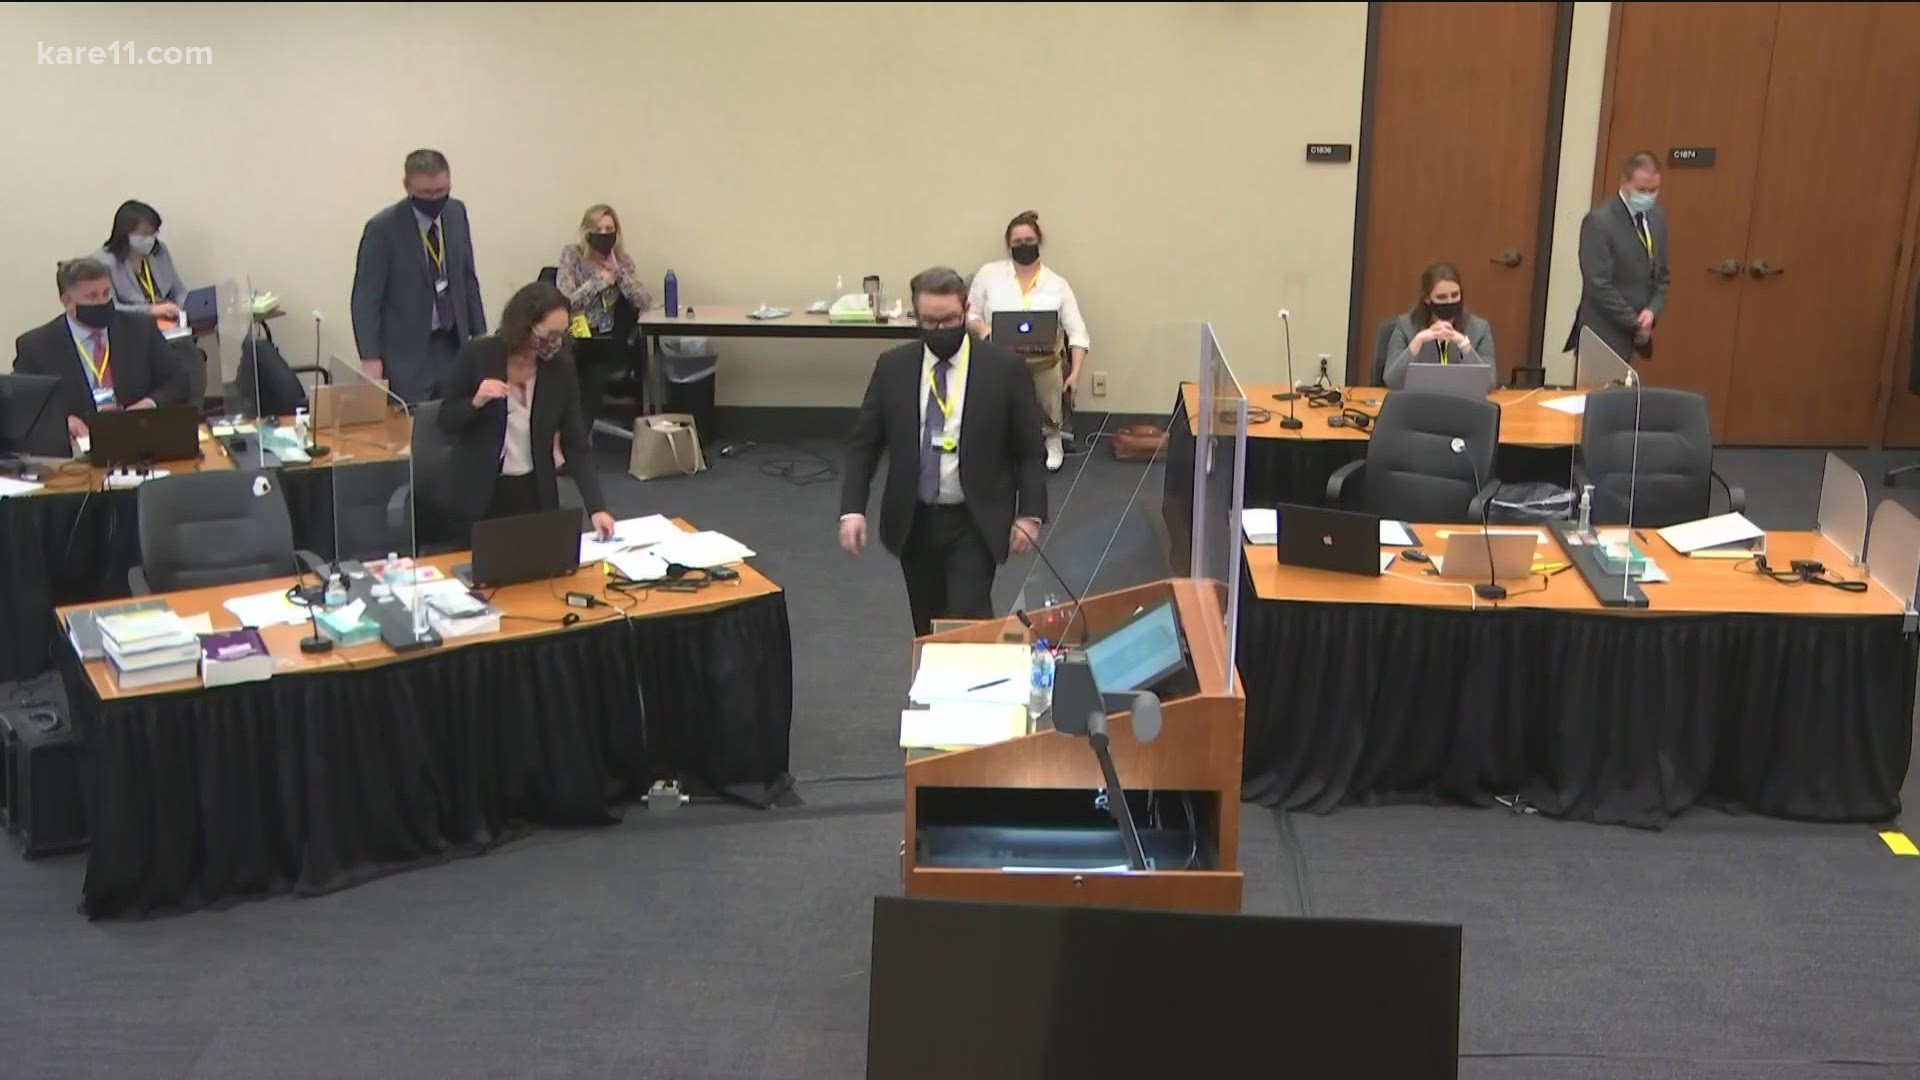 KARE 11's Lauren Leamanczyk was inside the courtroom as media members have been taking turns sitting in on the Derek Chauvin trial during the pandemic.